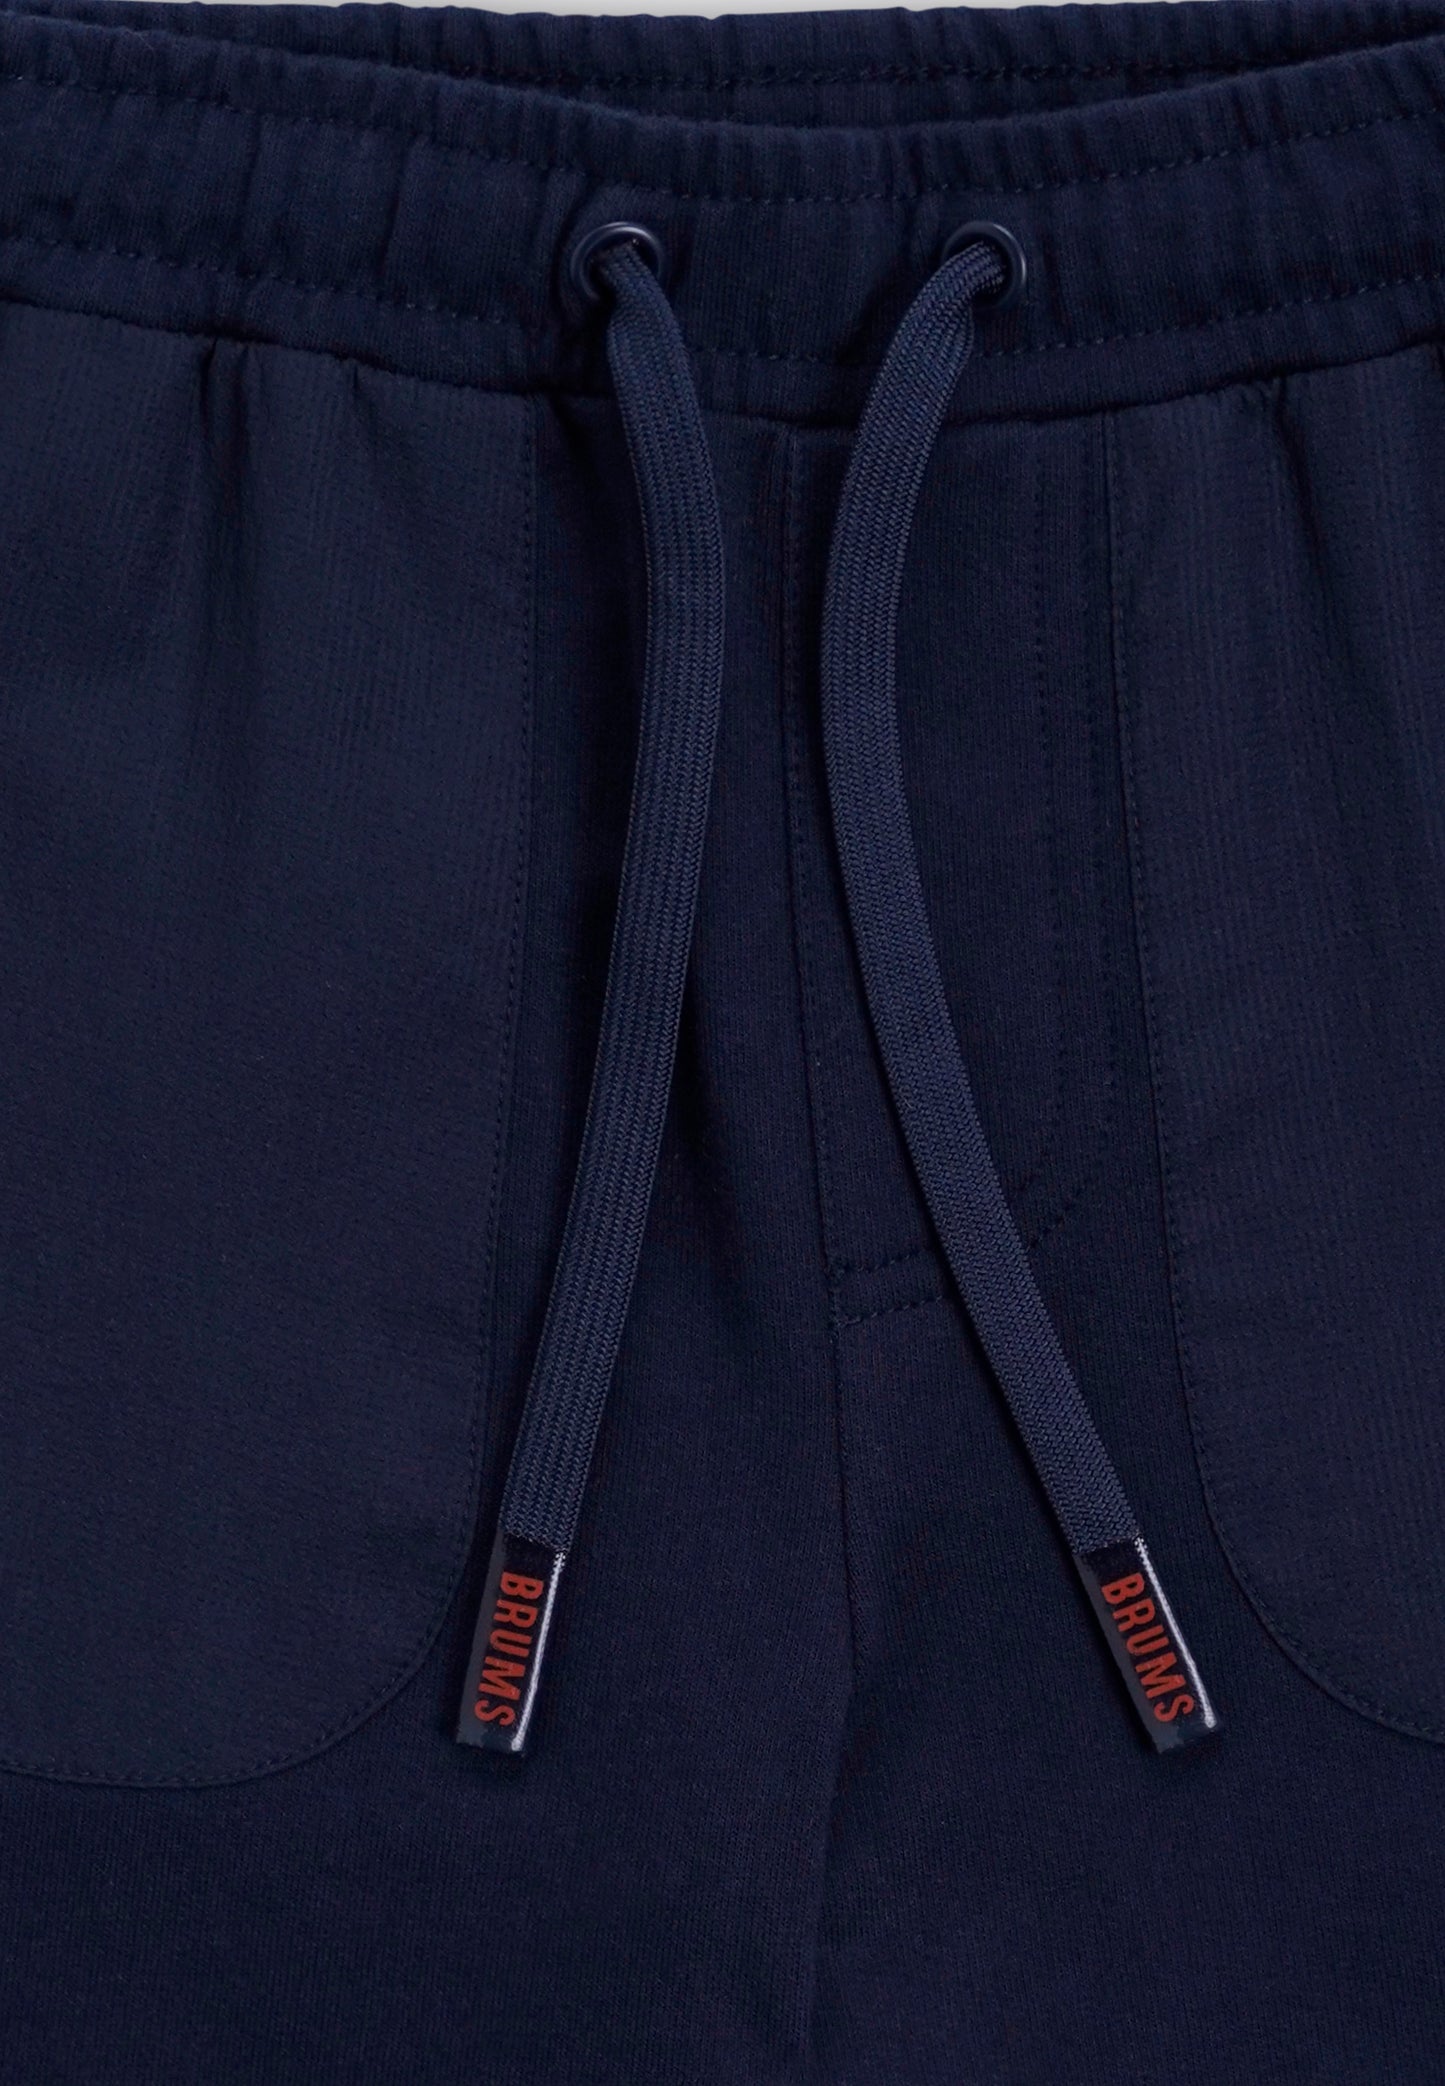 Fleece Shorts with Ribstop Inserts